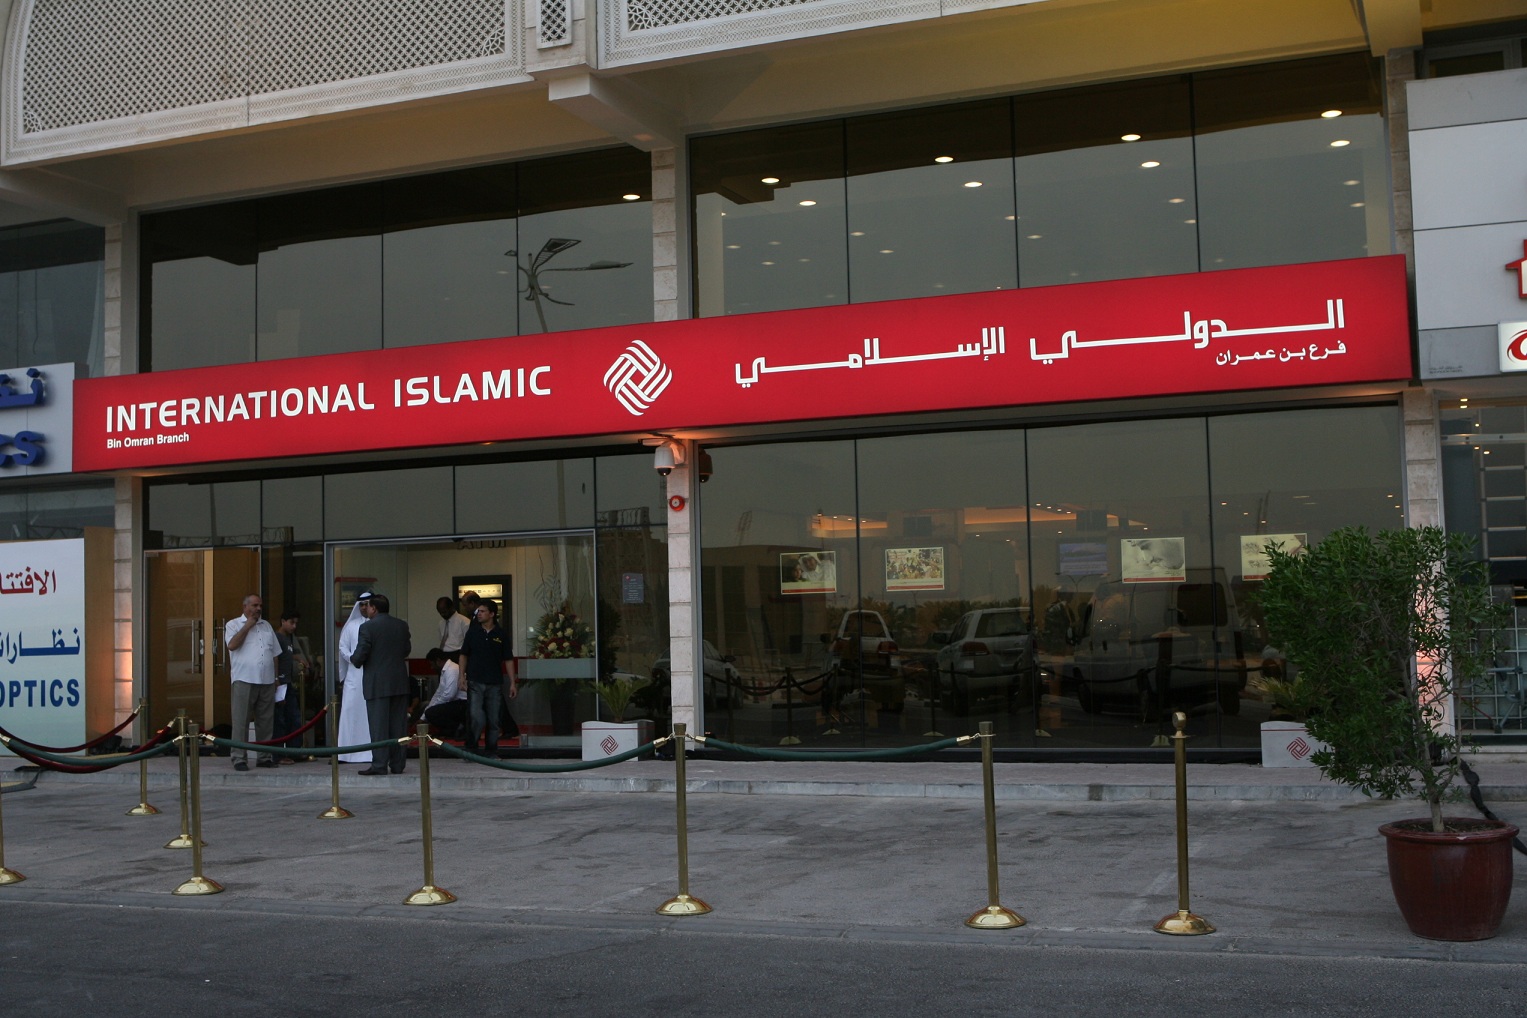 Fitch affirmed Qatar International Islamic Bank (QIIB) to 'A' with a stable outlook. The rating is based on the bank’s financial data submitted at the end of the third quarter this year